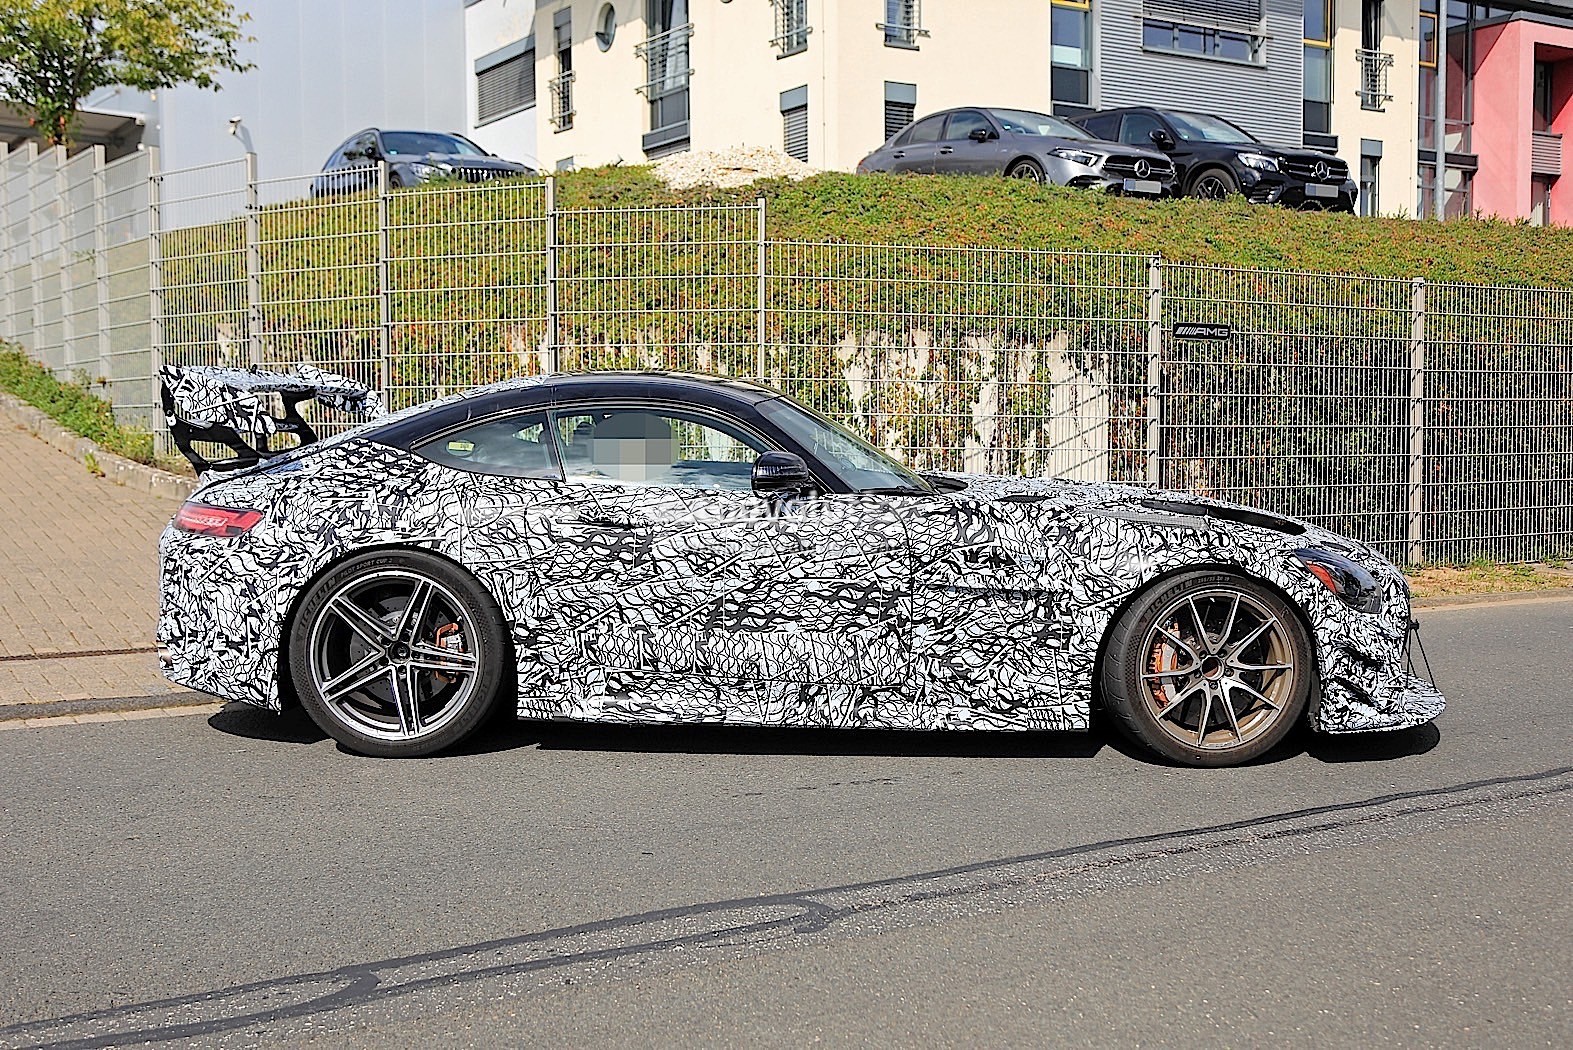 2021 Mercedes-AMG GT Black Series - What We Know So Far ...